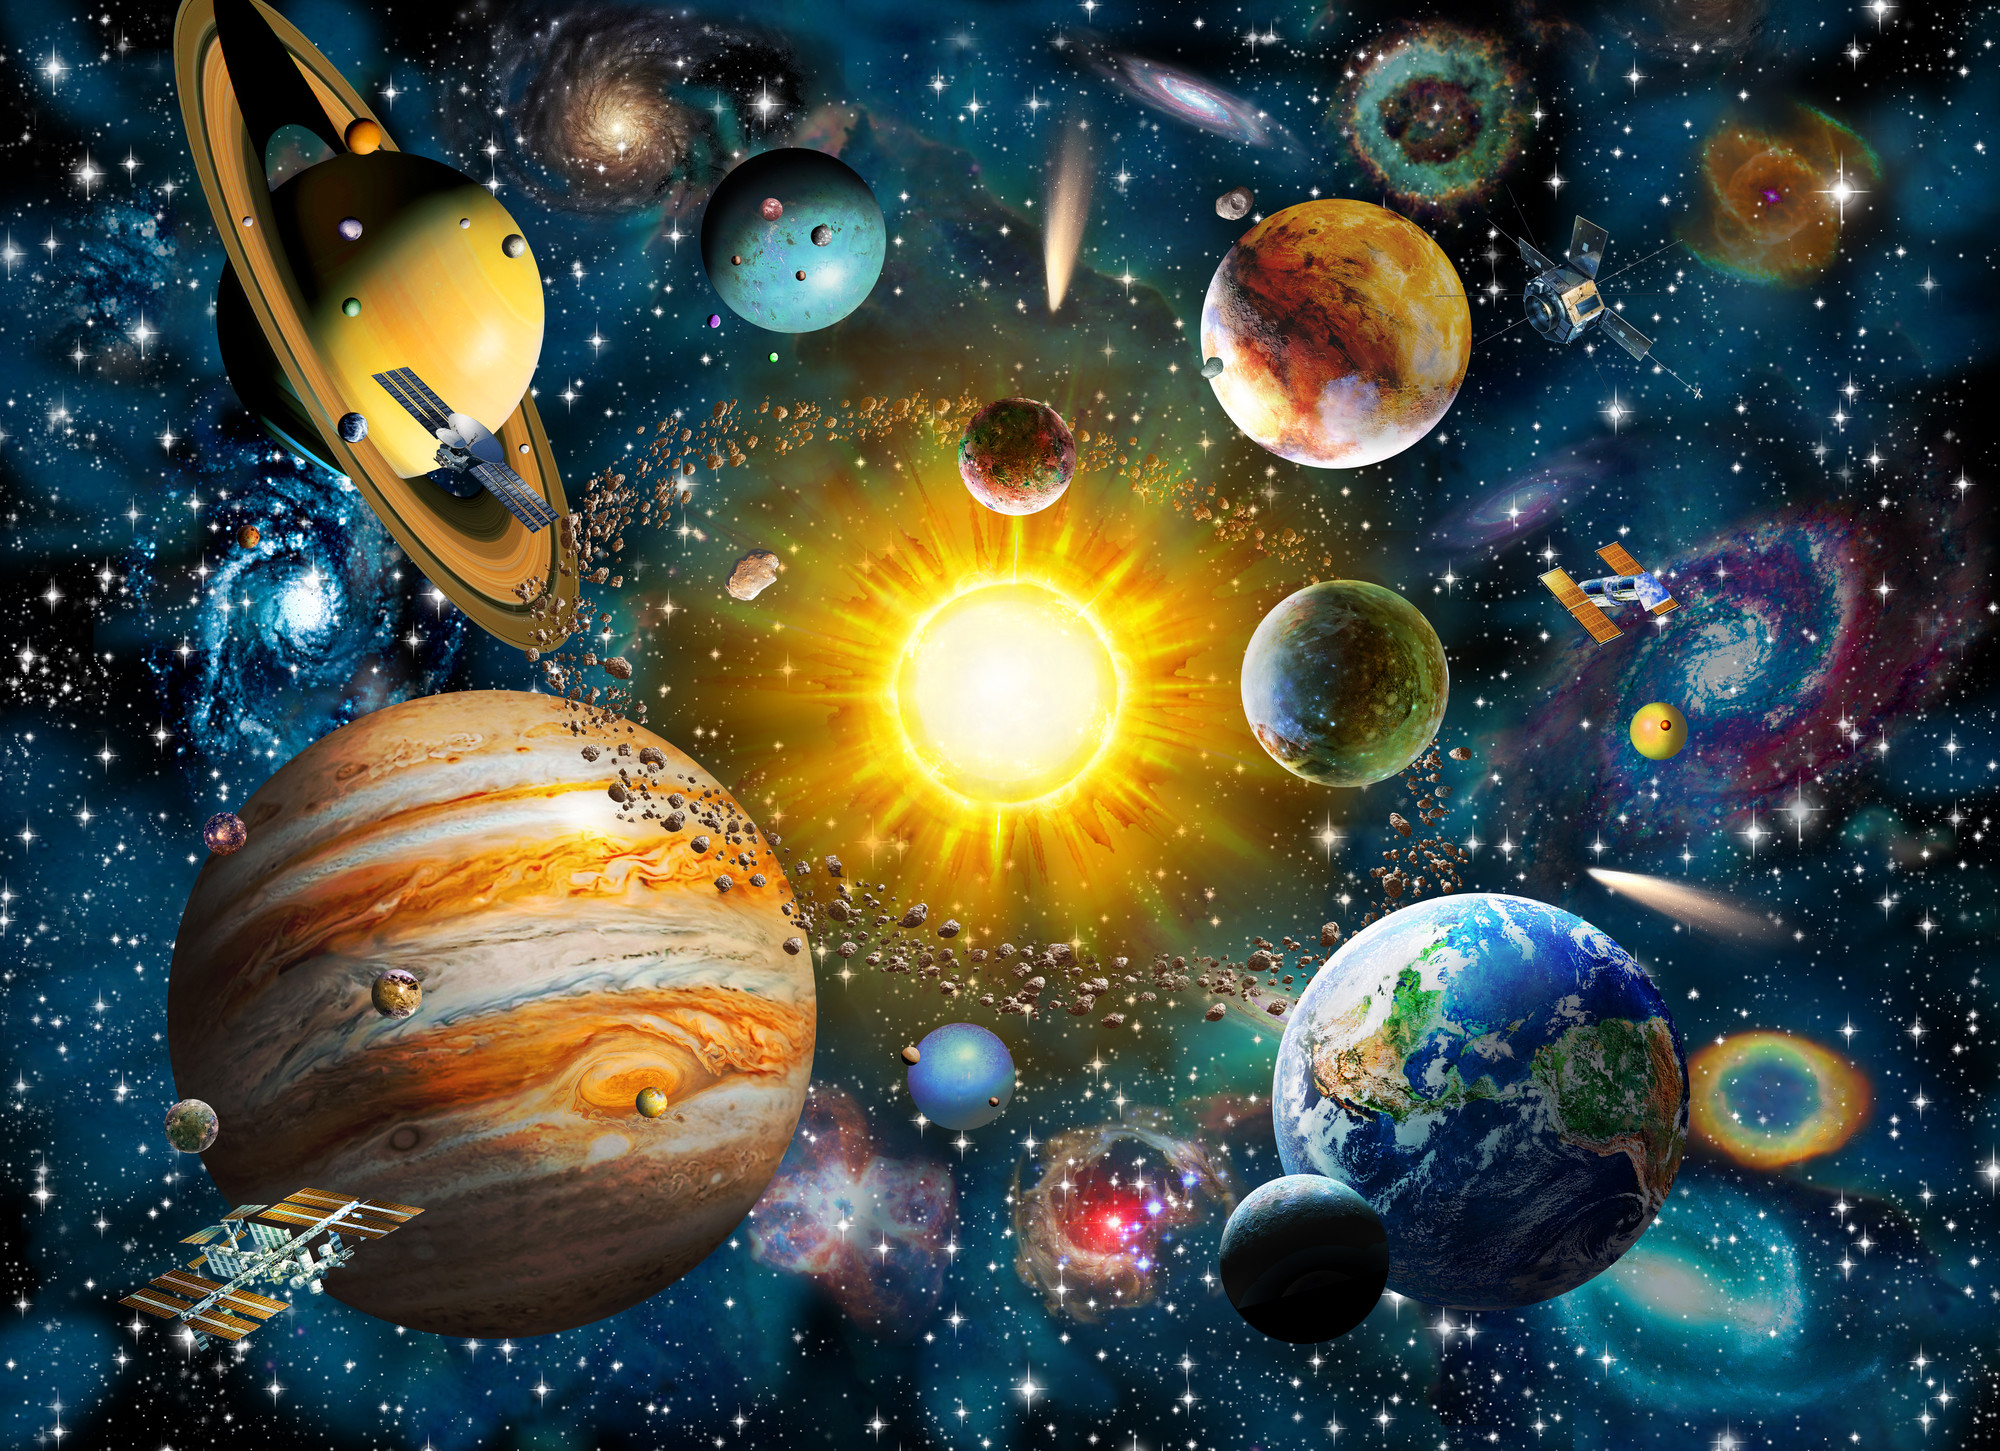 solar system wallpaper,outer space,space,planet,astronomical object,universe